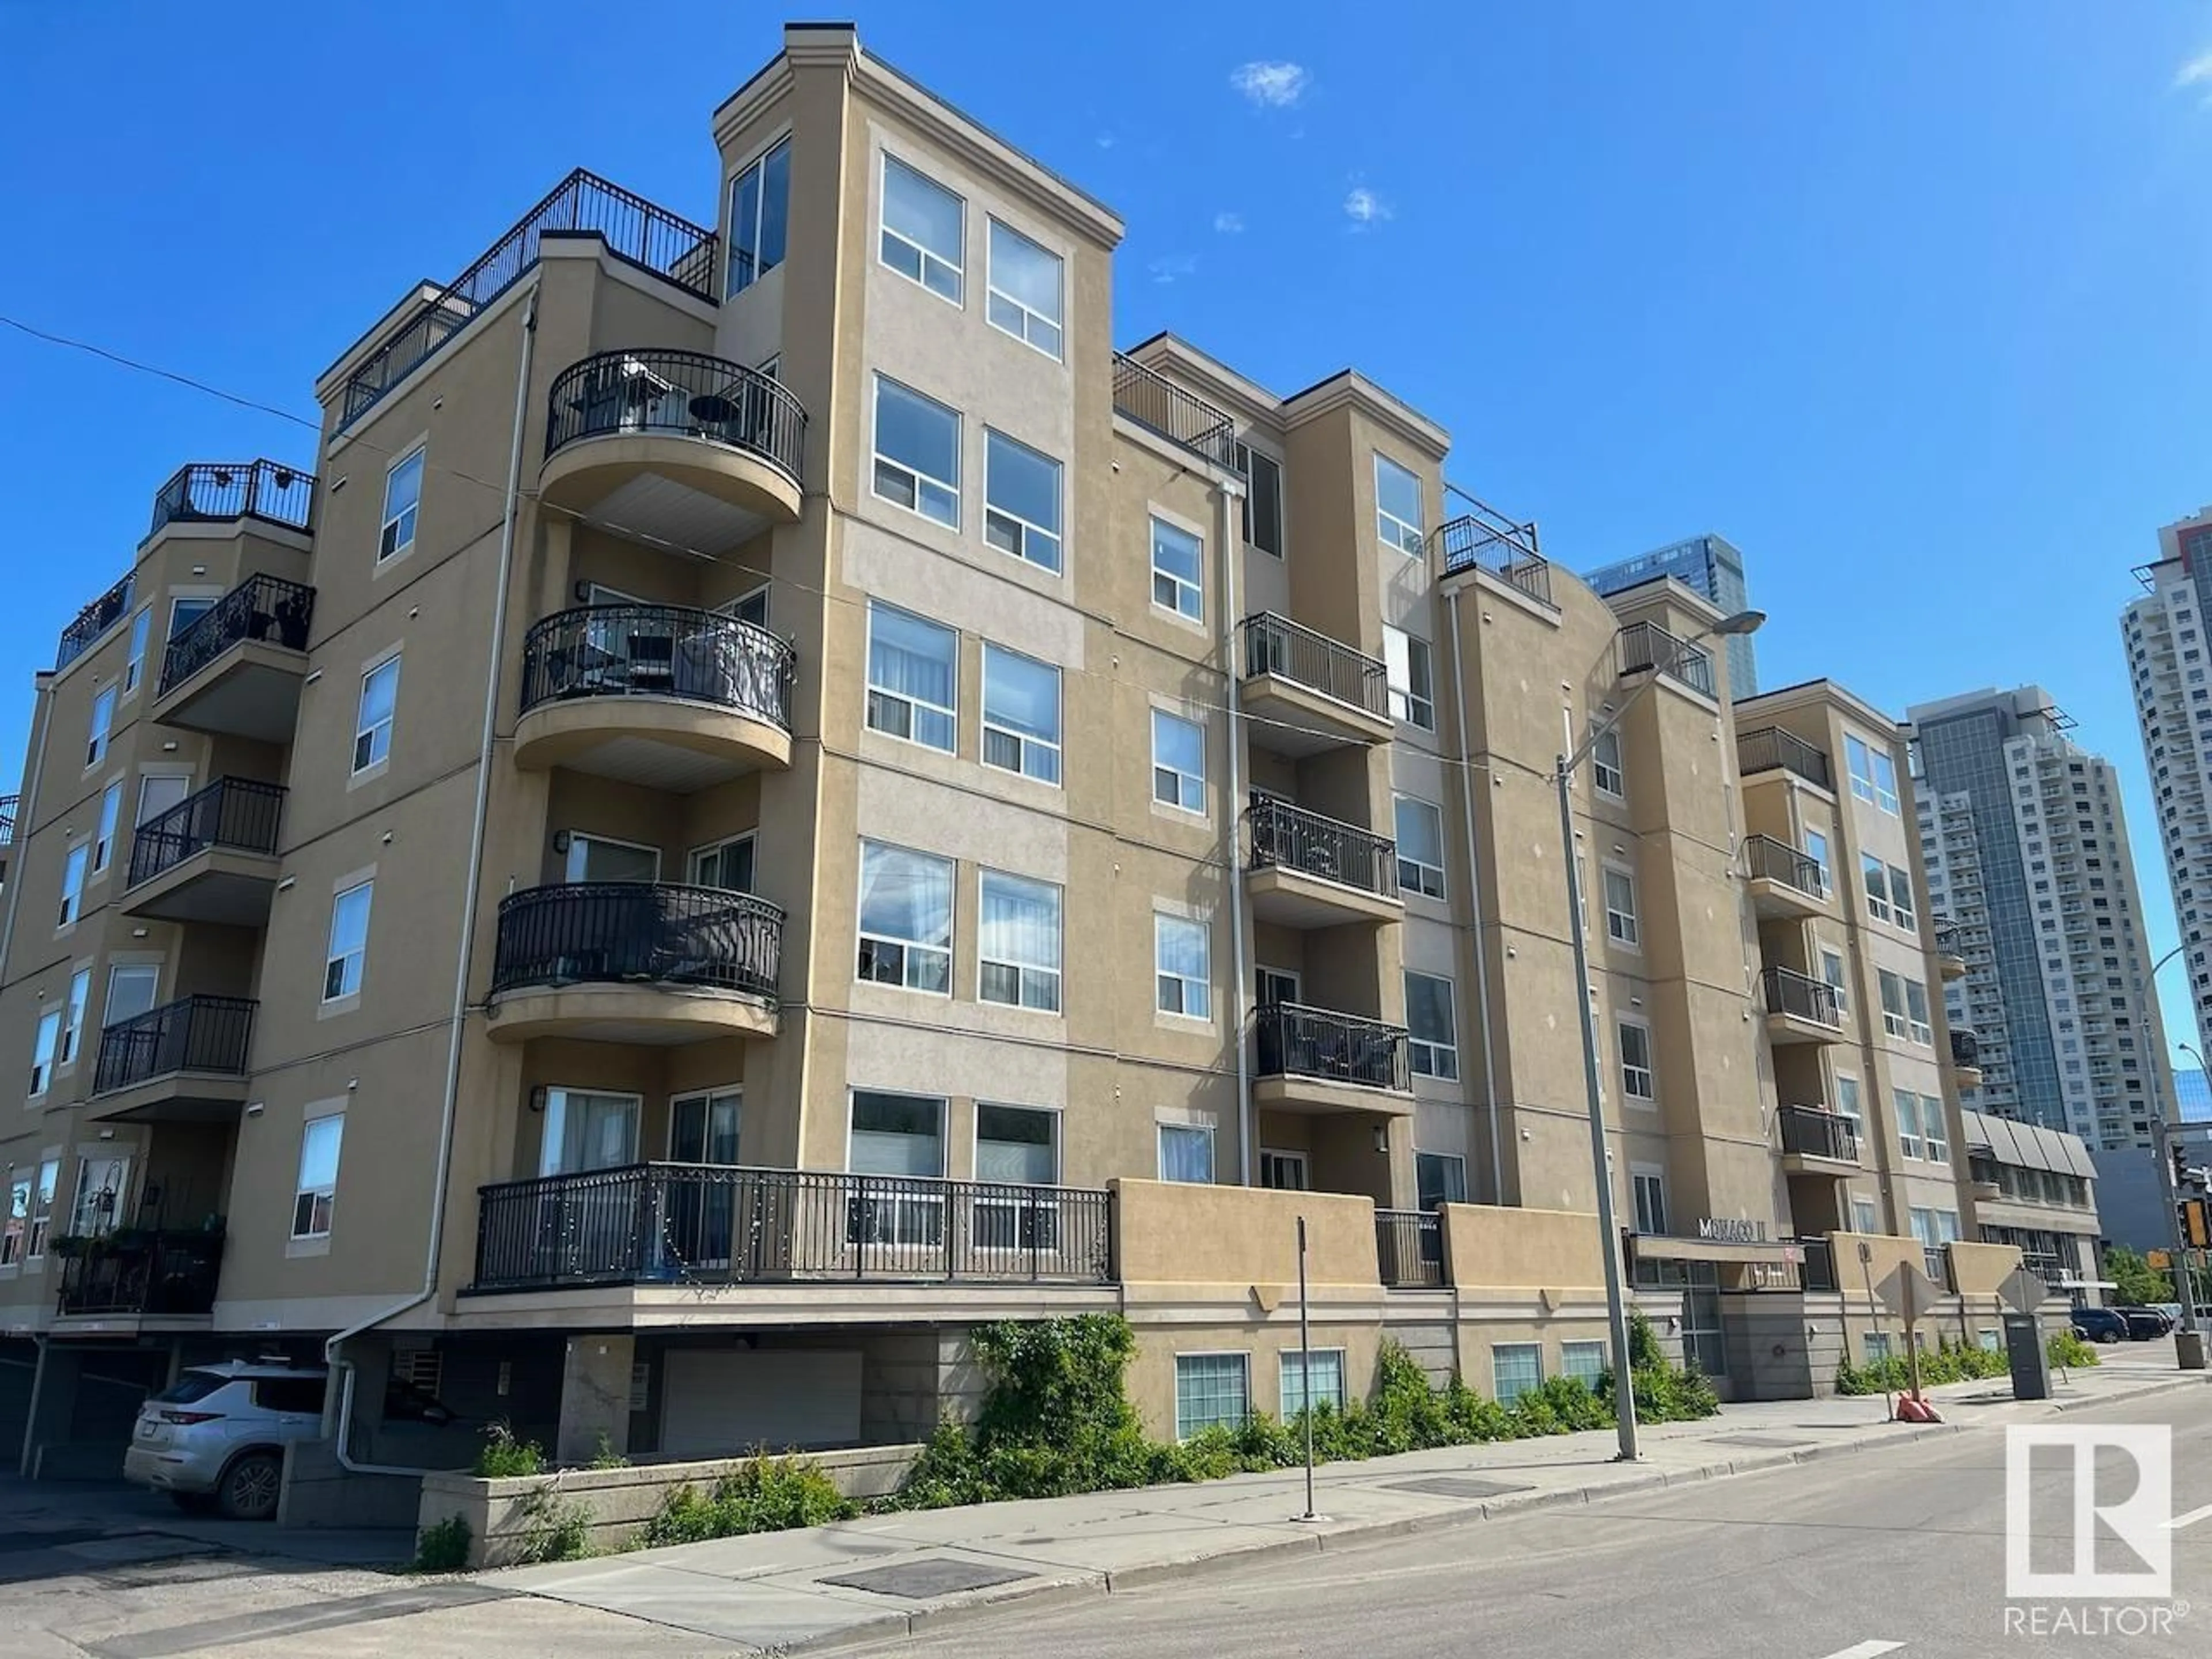 A pic from exterior of the house or condo for #504 10606 102 AV NW, Edmonton Alberta T5J5E9